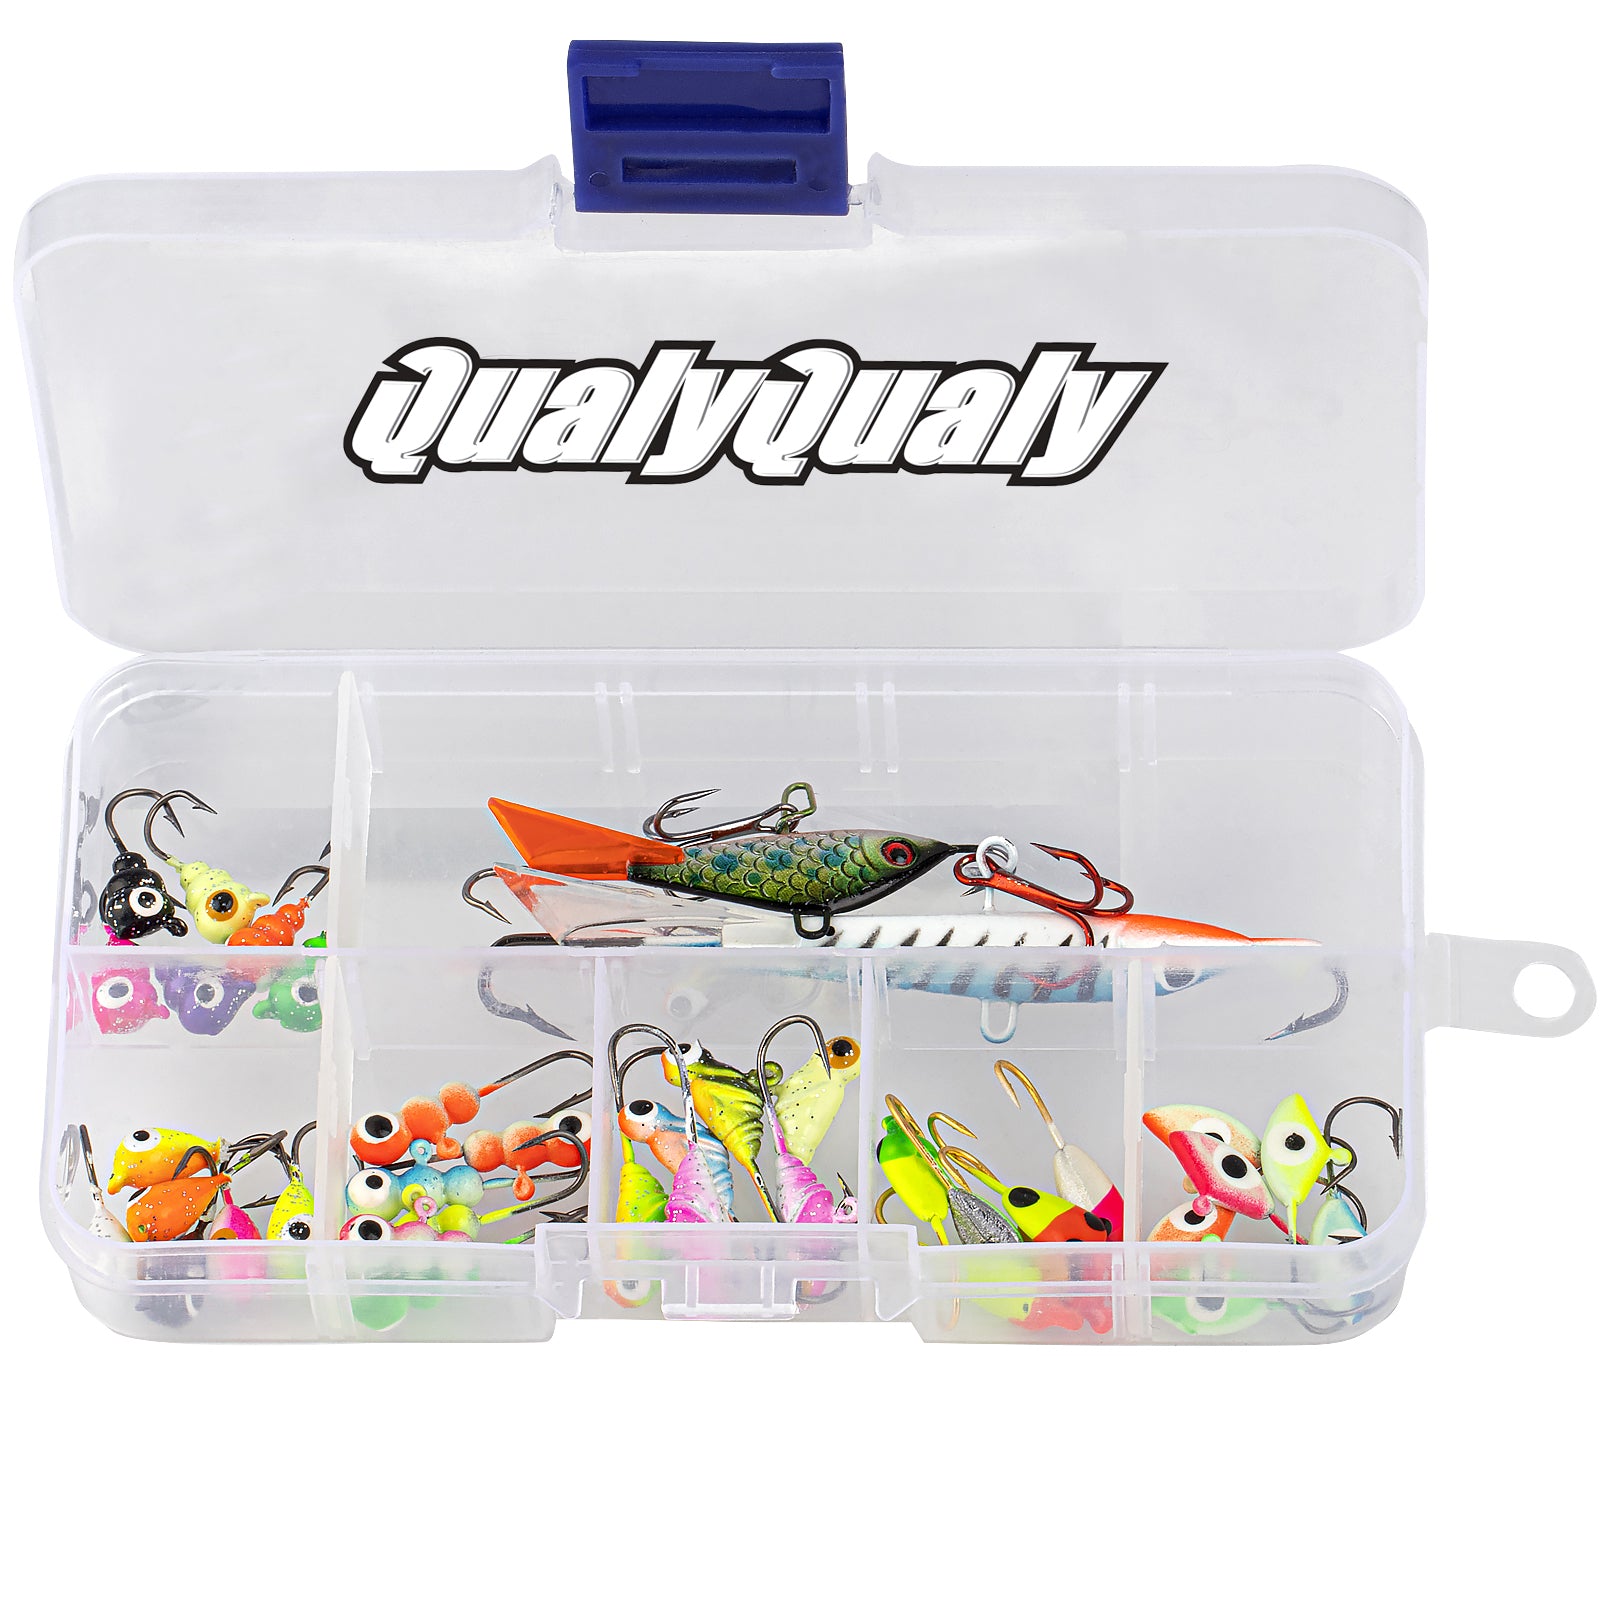 QualyQualy Ice Fishing Jigs Ice Fishing Lures Walleye Fishing Lures Crappie  Jigs Glow in Dark-Ice Fishing Jigs with Storage Box 38Pcs